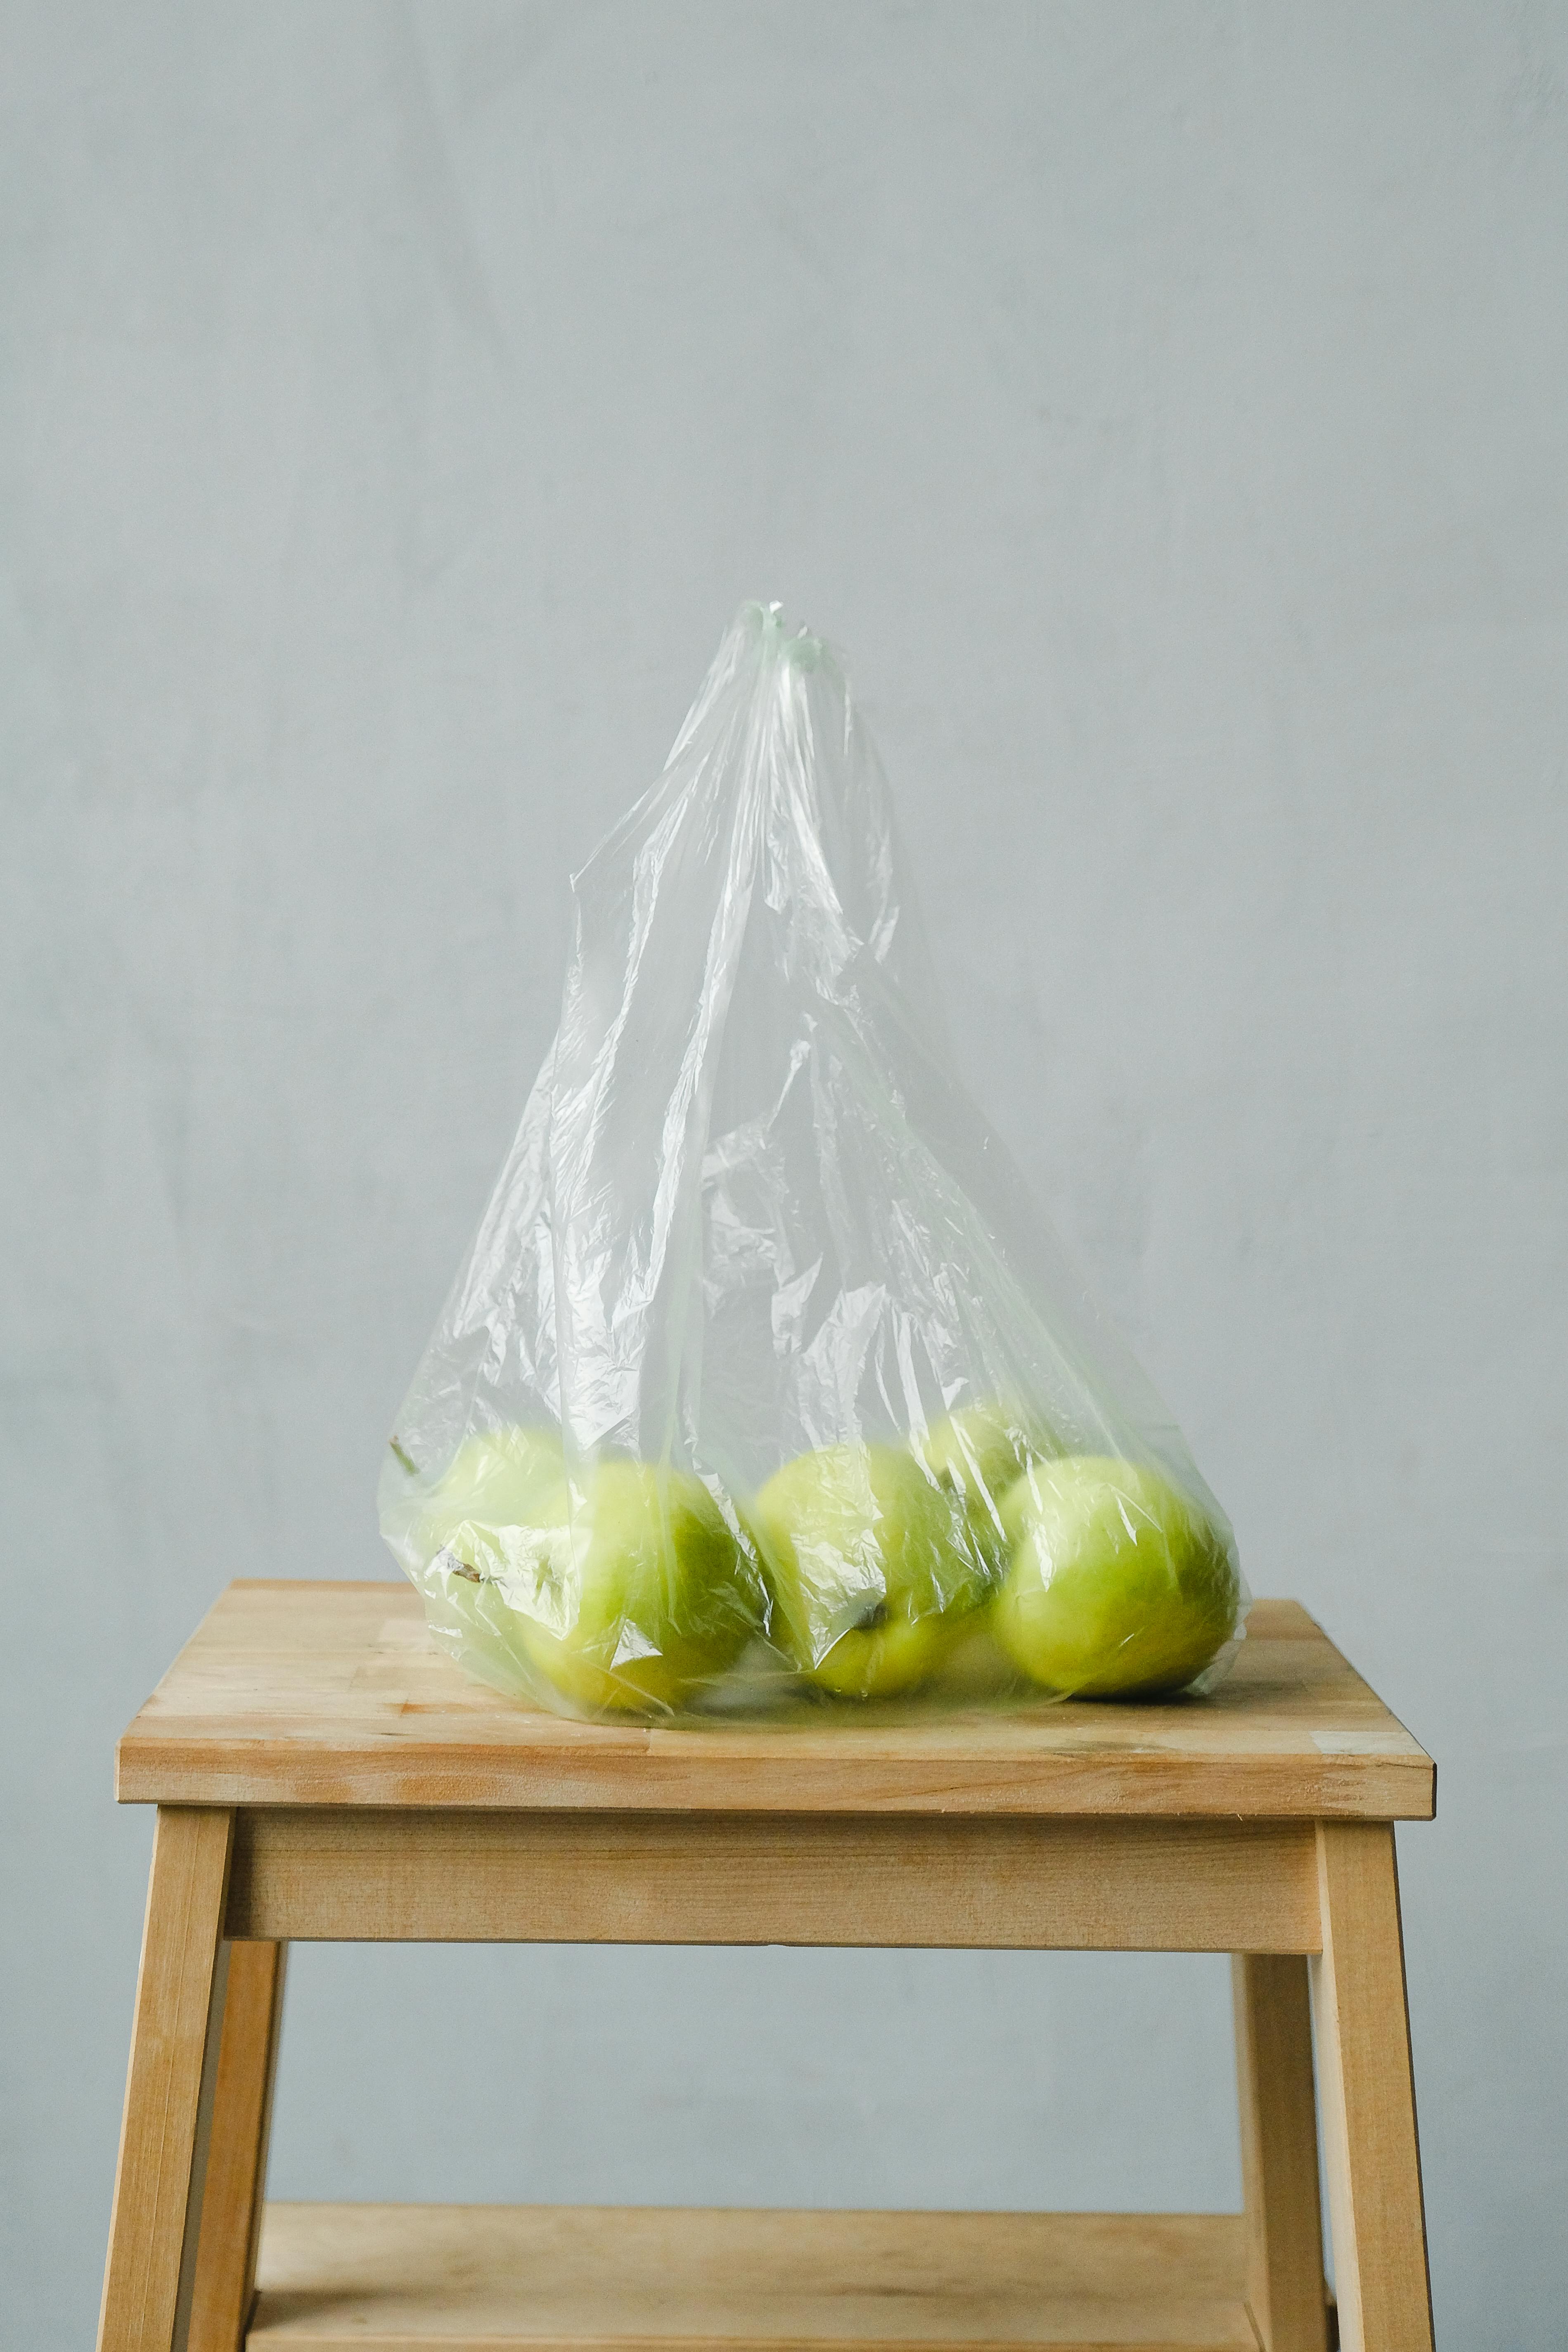 Download Green Apples Inside A Plastic Bag Free Stock Photo PSD Mockup Templates